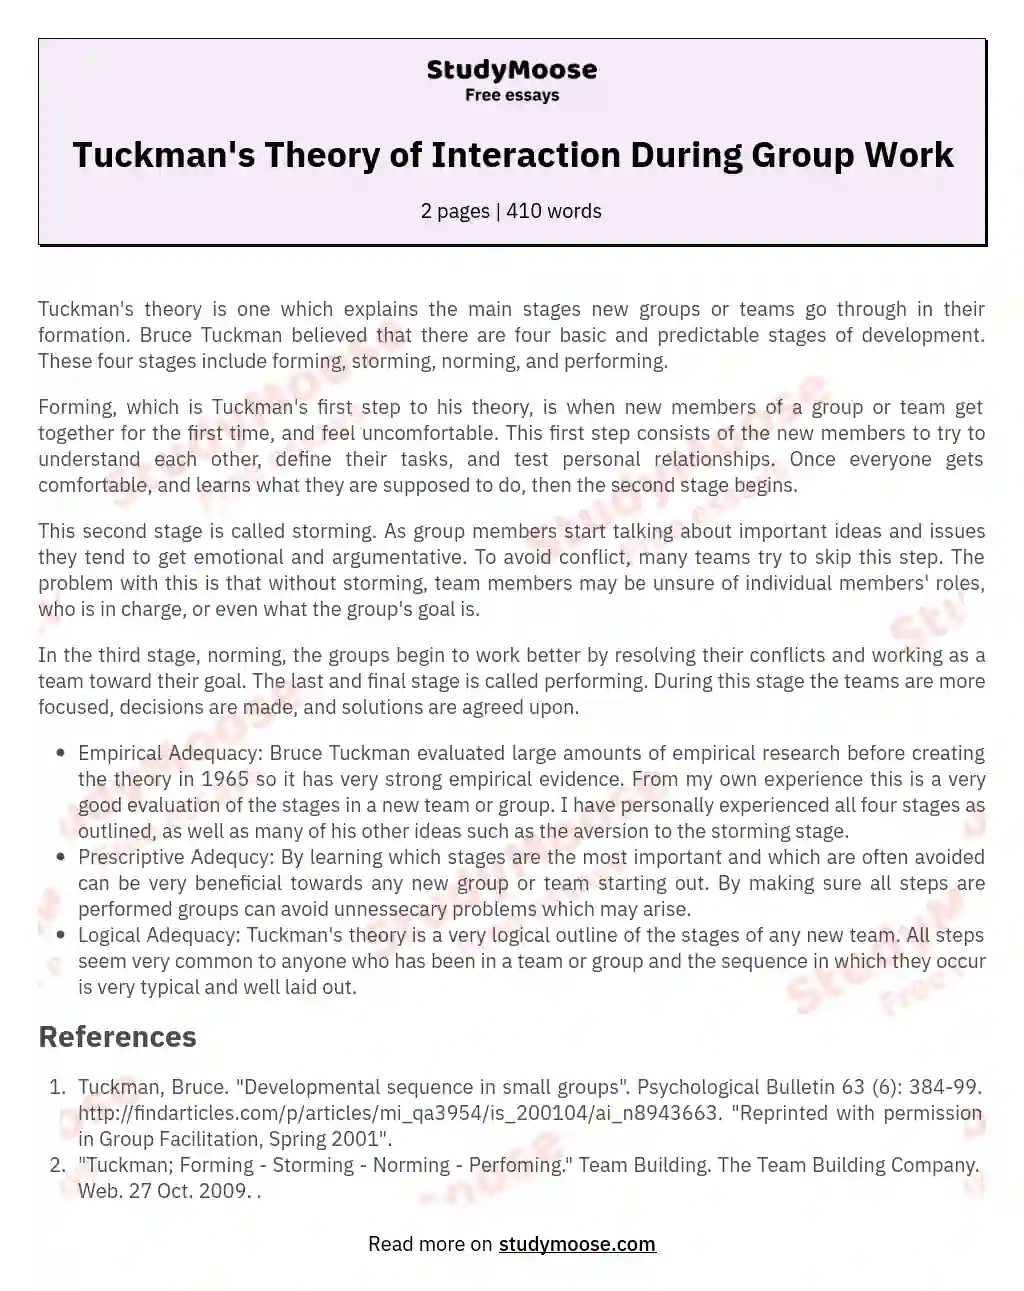 Tuckman's Theory of Interaction During Group Work essay